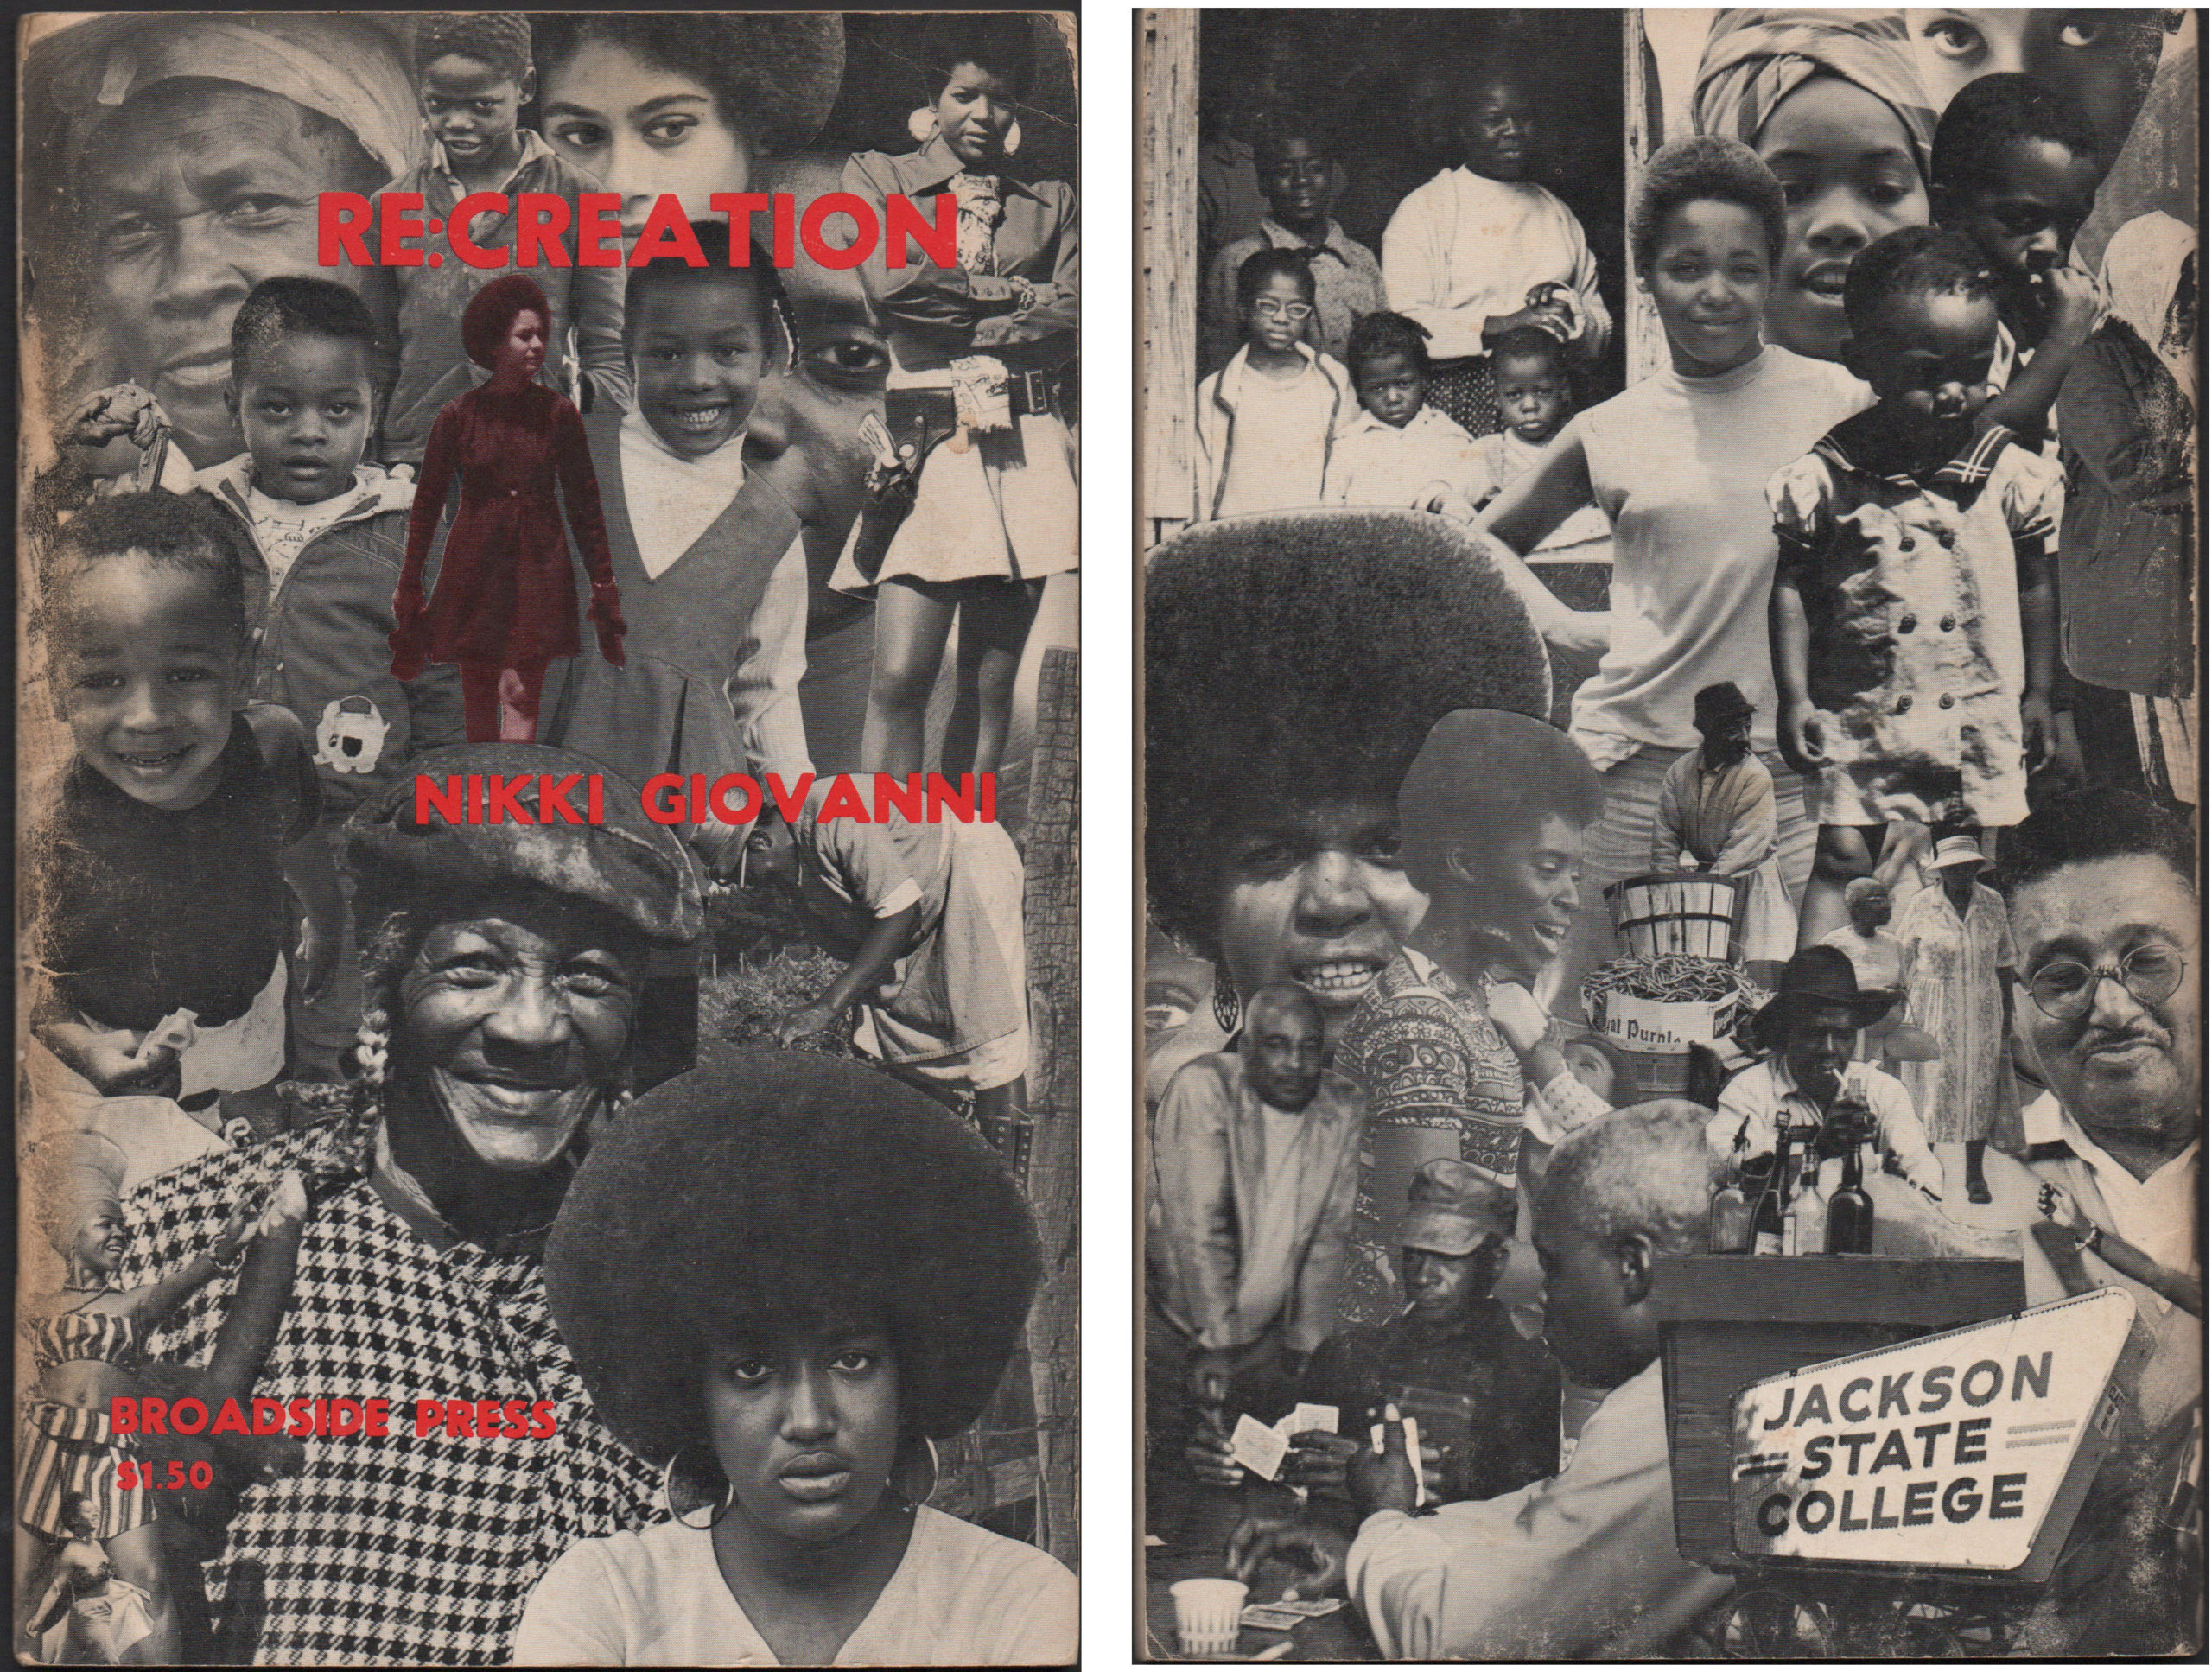 The front and back covers of a book are shown. A collage of black-and-white photographs completely bleeds off all sides of the two covers. The cut-and-pasted photographs depict Black people of different ages, some with natural Afro hair styles. The title “RE:CREATION” and the author’s name are typeset in red Futura caps. One figure is highlighted with red ink, printed transparently over the black photograph. An outdoor sign for Jackson State College appears on the back cover.